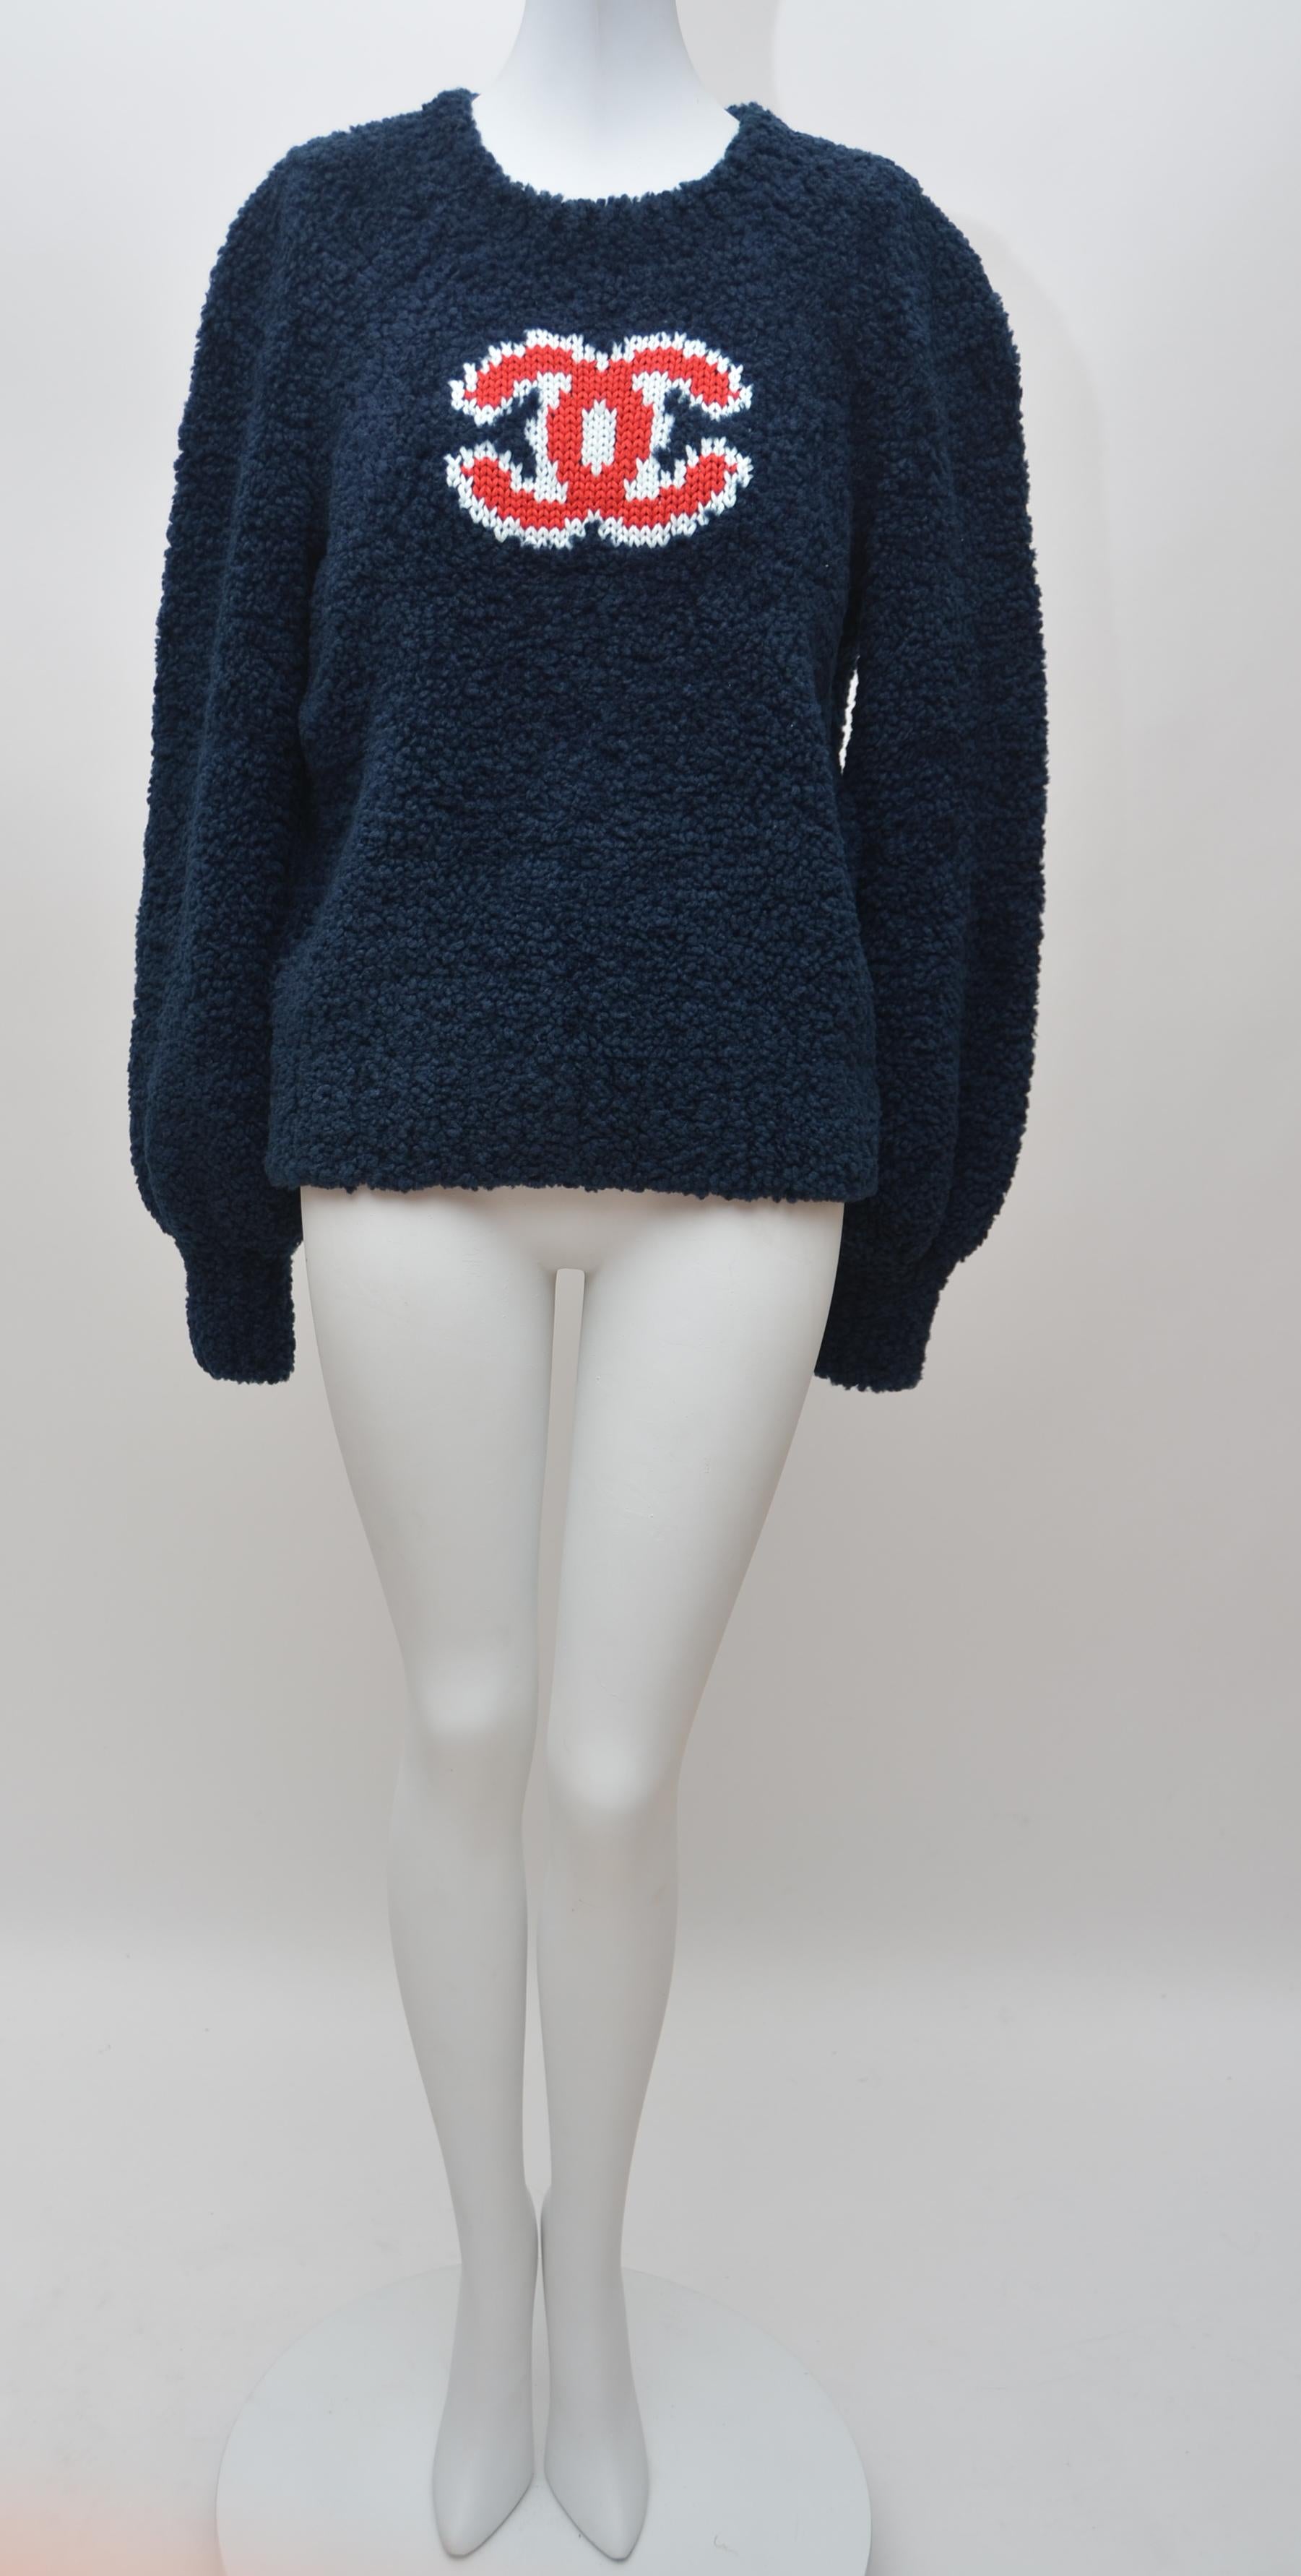 100% AUTHENTIC GUARANTEED Chanel teddy sweater in blue 
Due to flashlight color tone might vary in person.
New with tags.
Receipt available to purchaser upon request
Size 38FR.
Please familiarize yourself with this particular Chanel sizing before